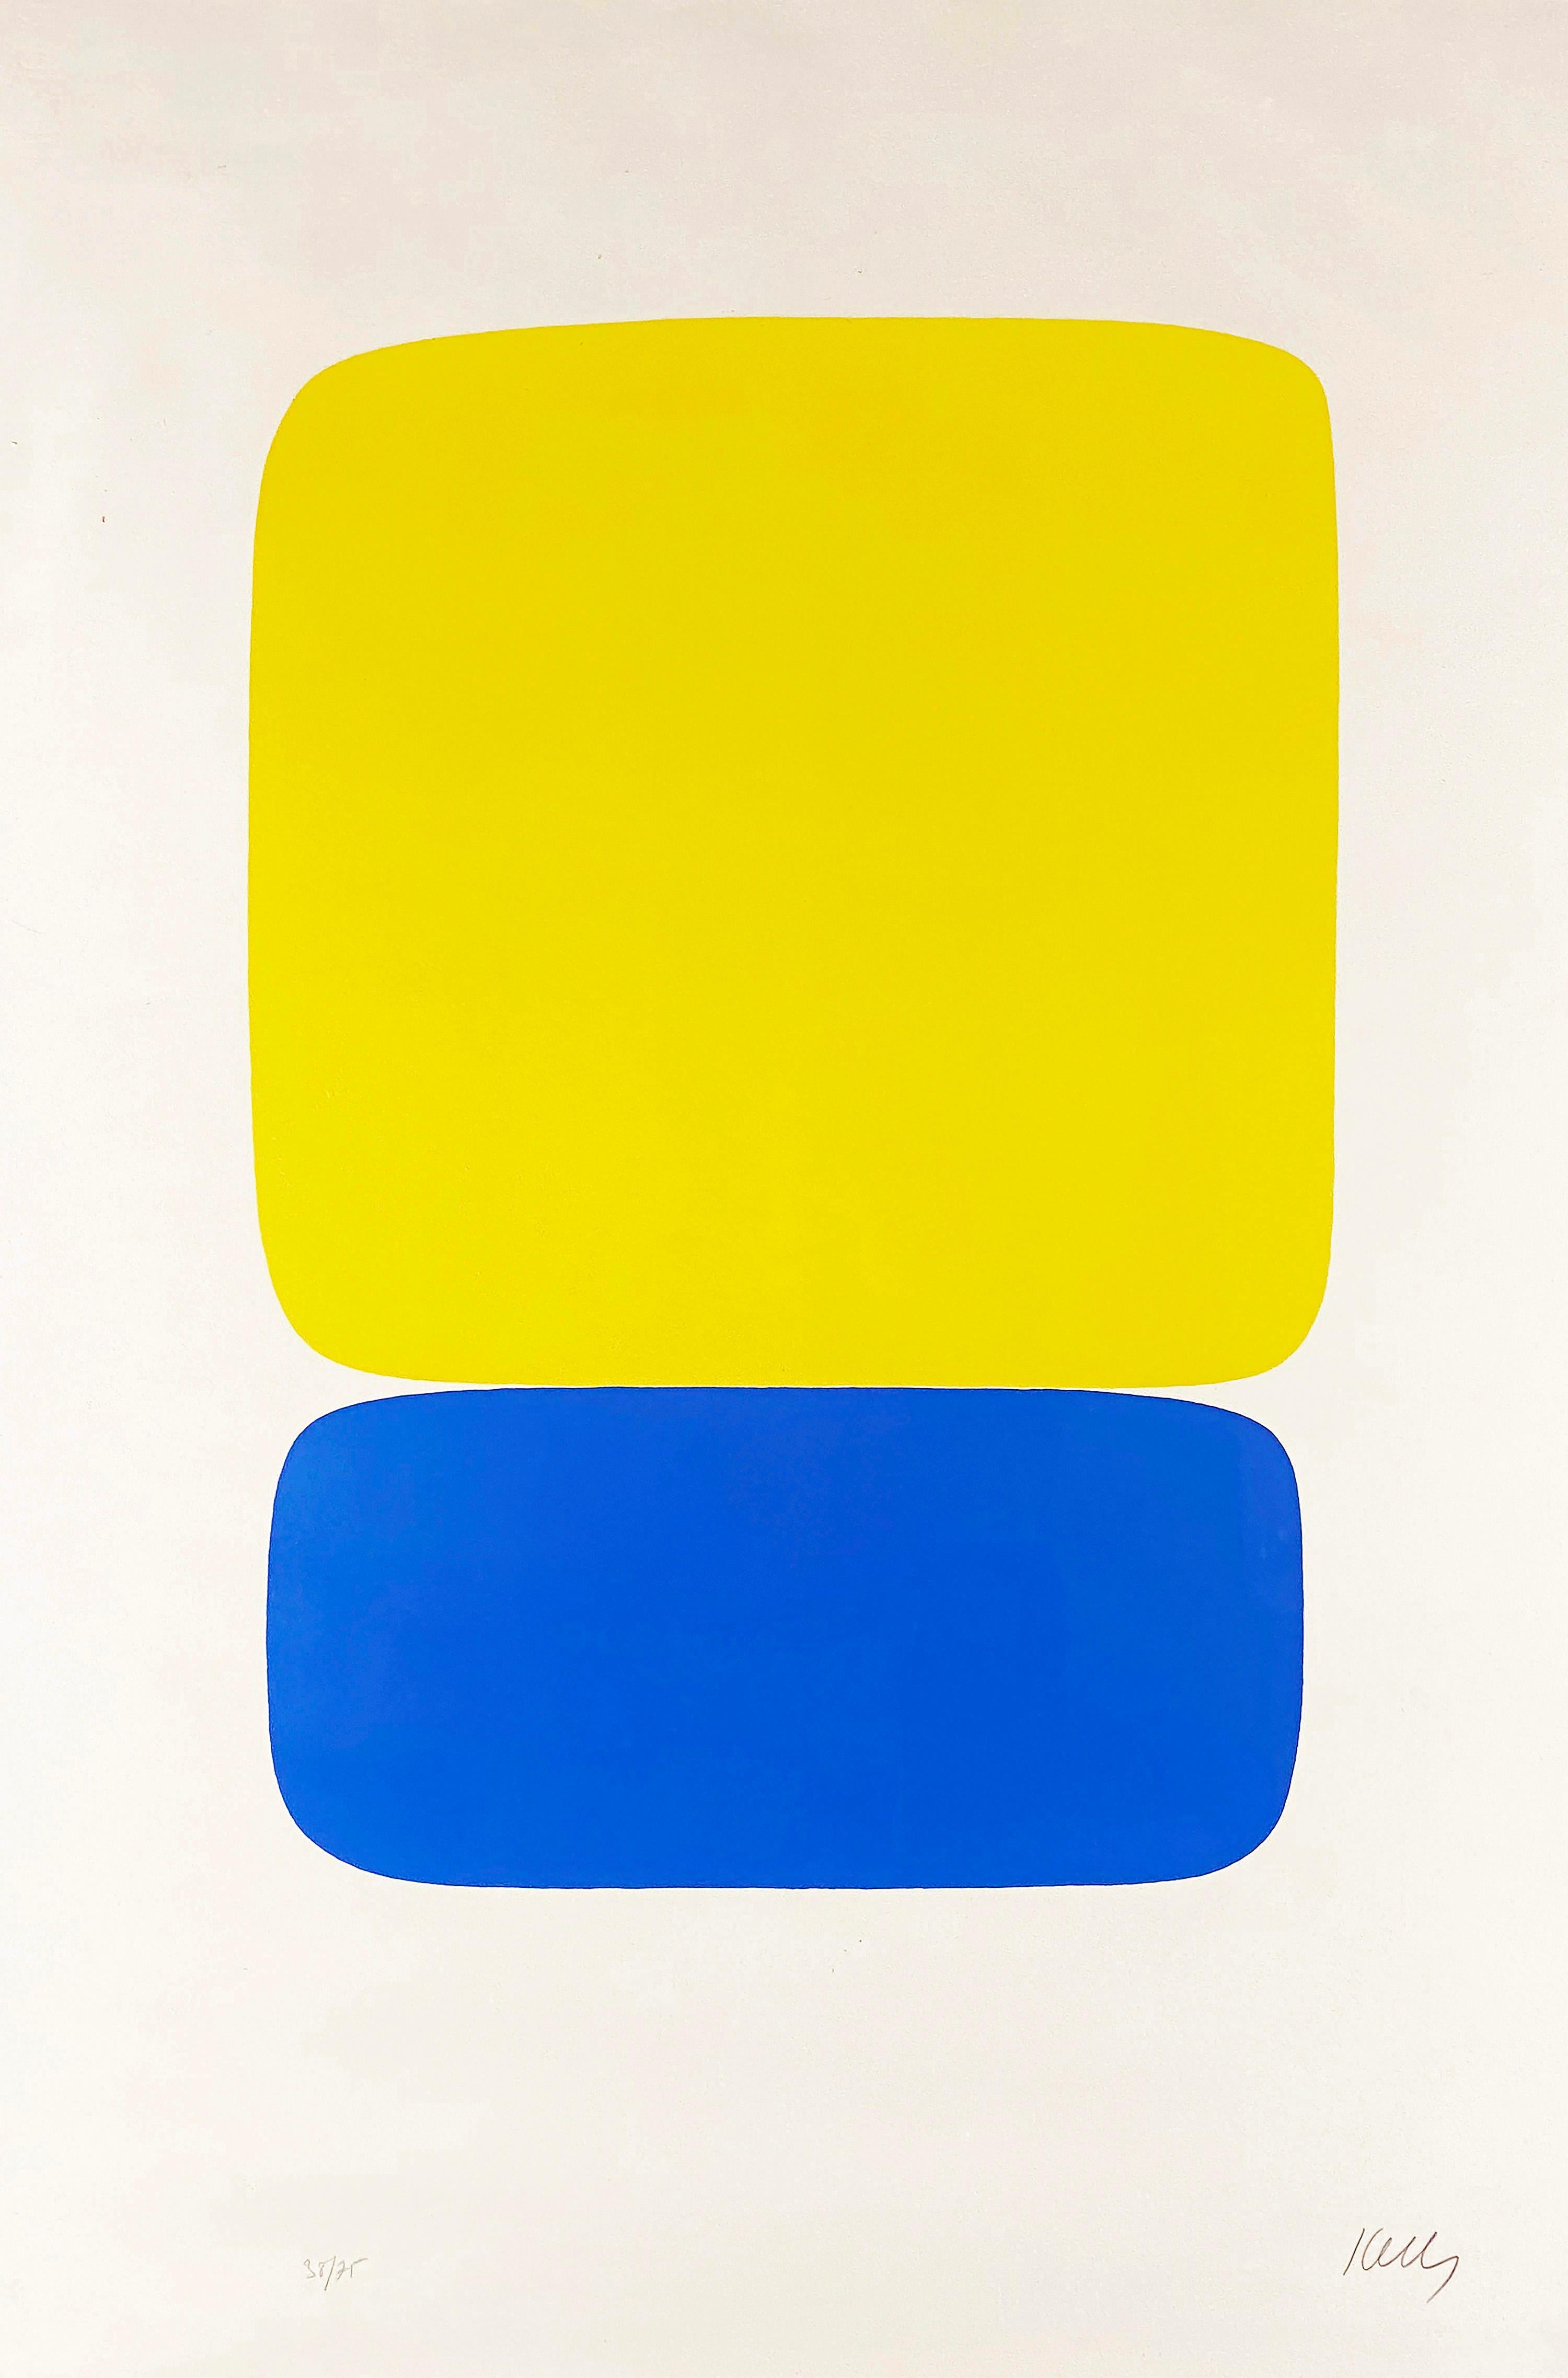 Ellsworth Kelly Abstract Print - Yellow Over Dark Blue (from the Suite of Twenty-Seven Color Lithographs)